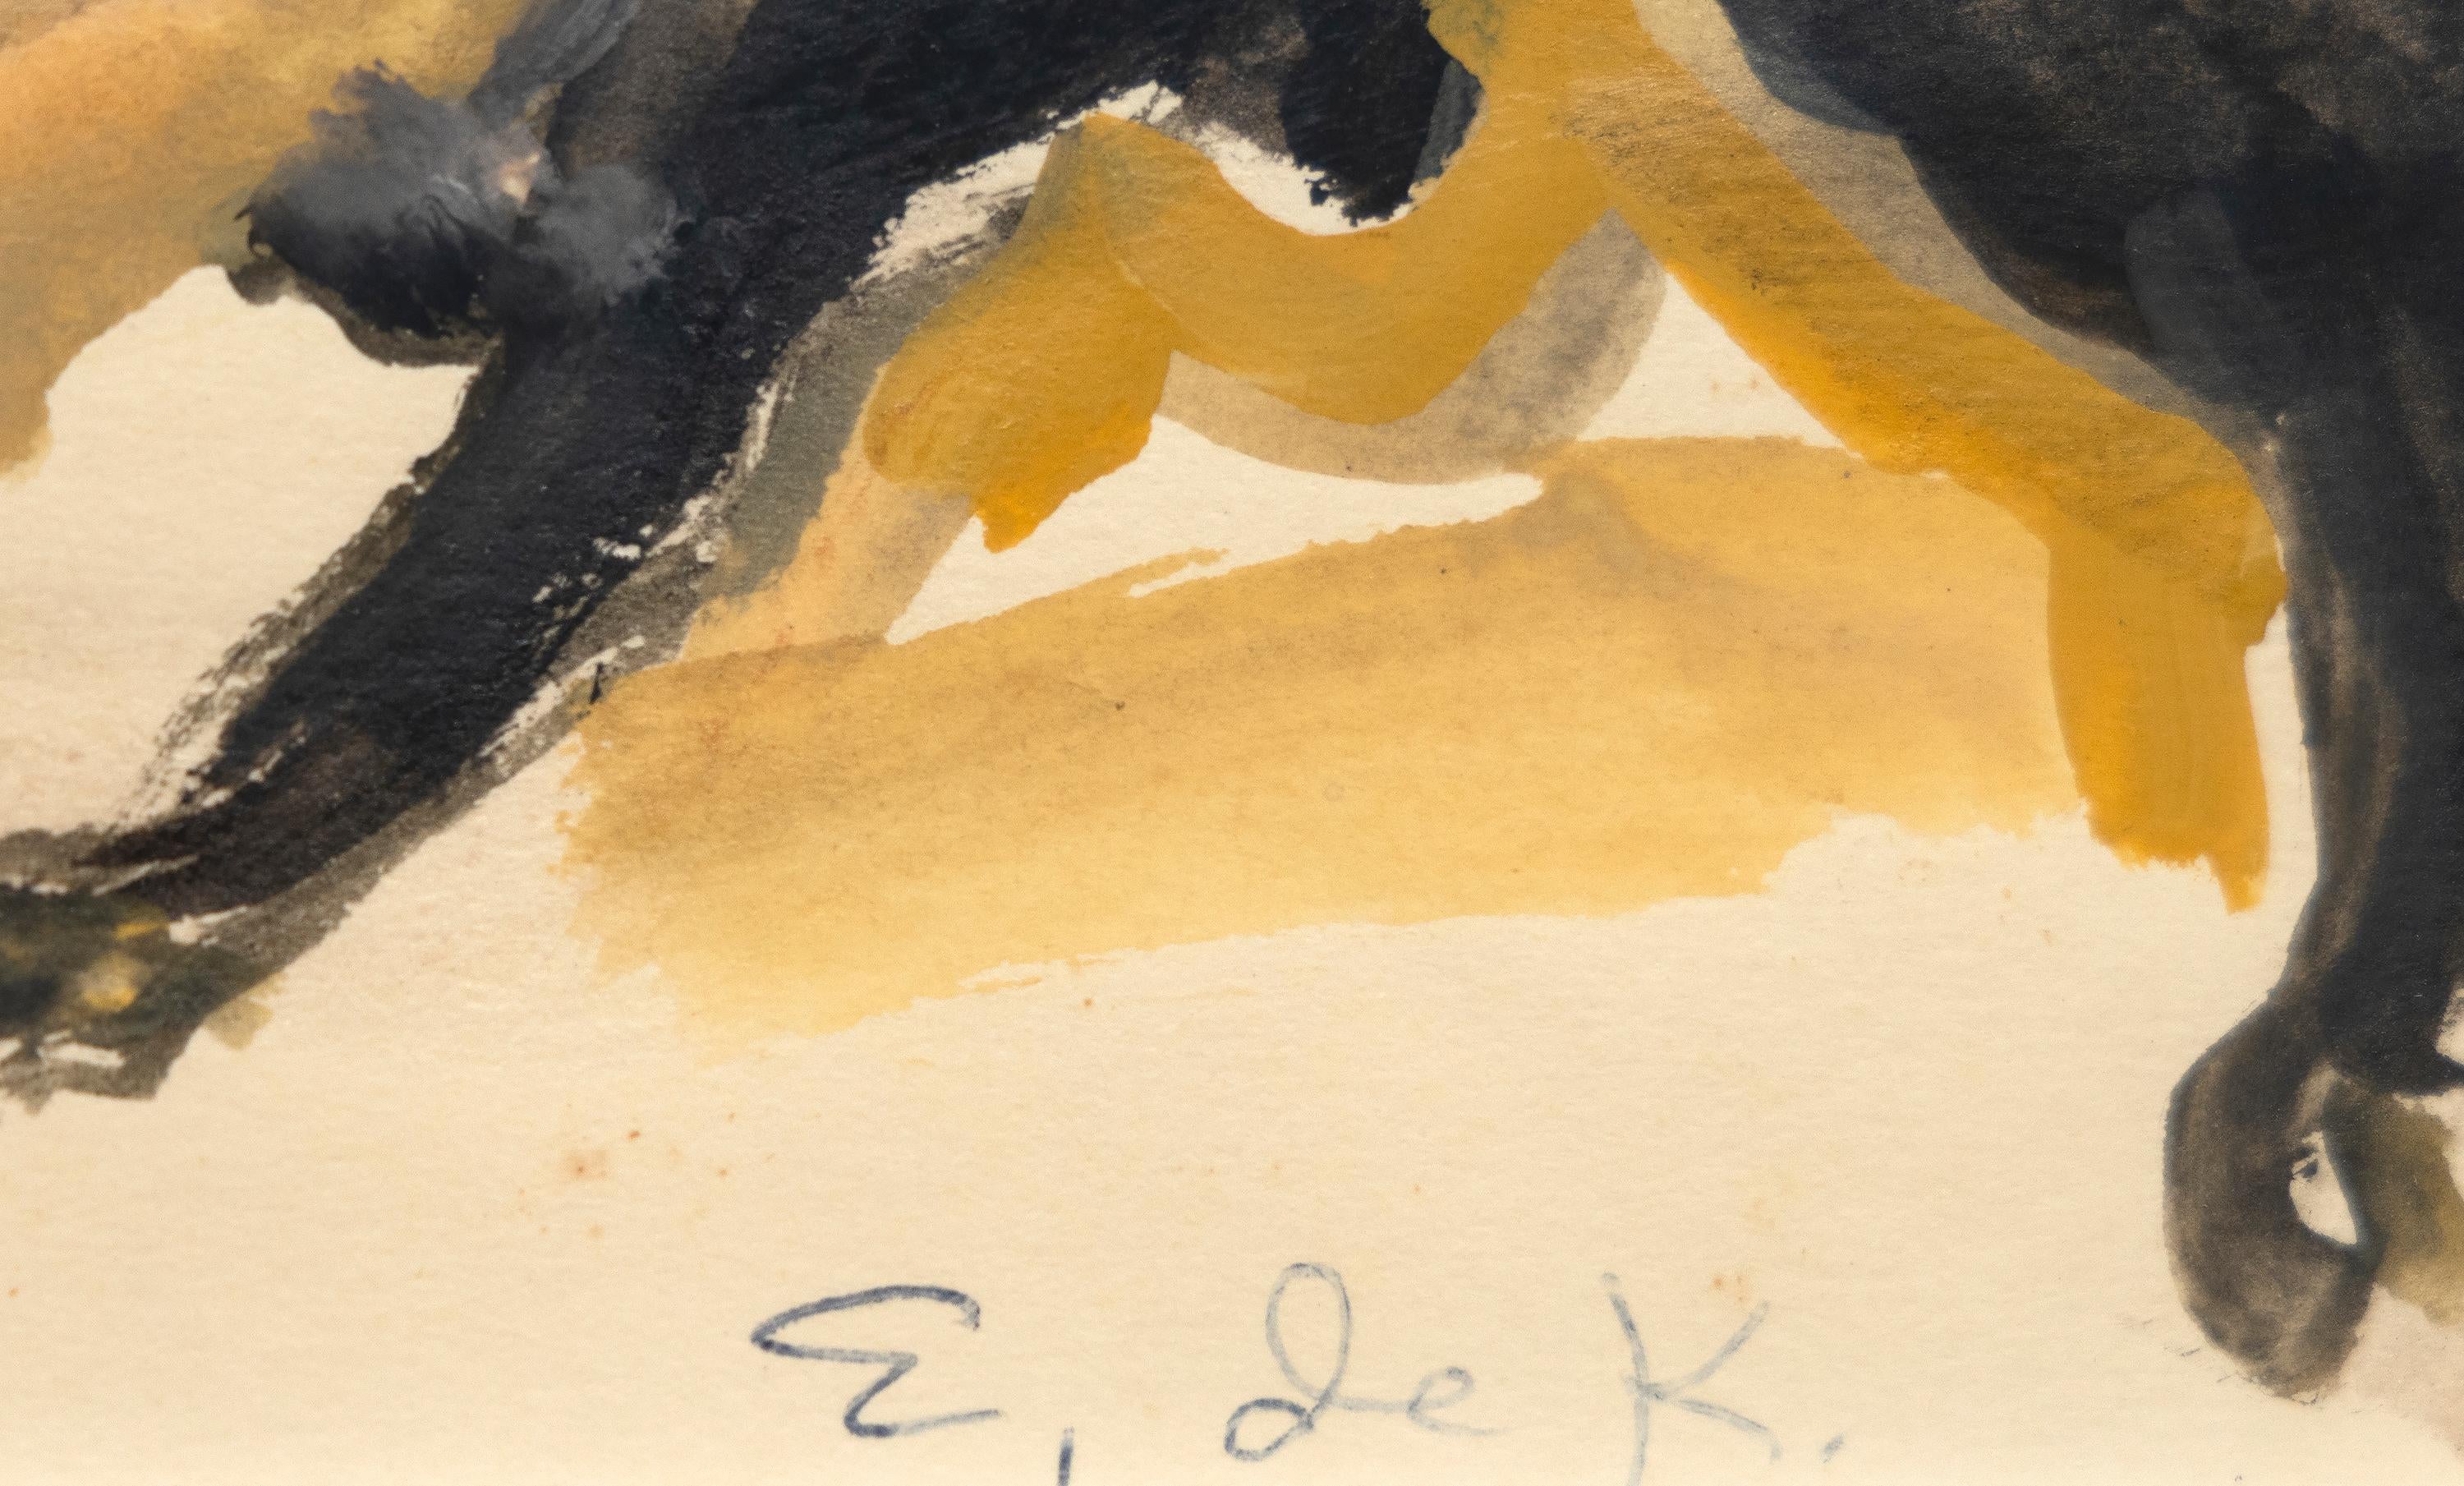 The Matador - Abstract Expressionist Art by Elaine de Kooning